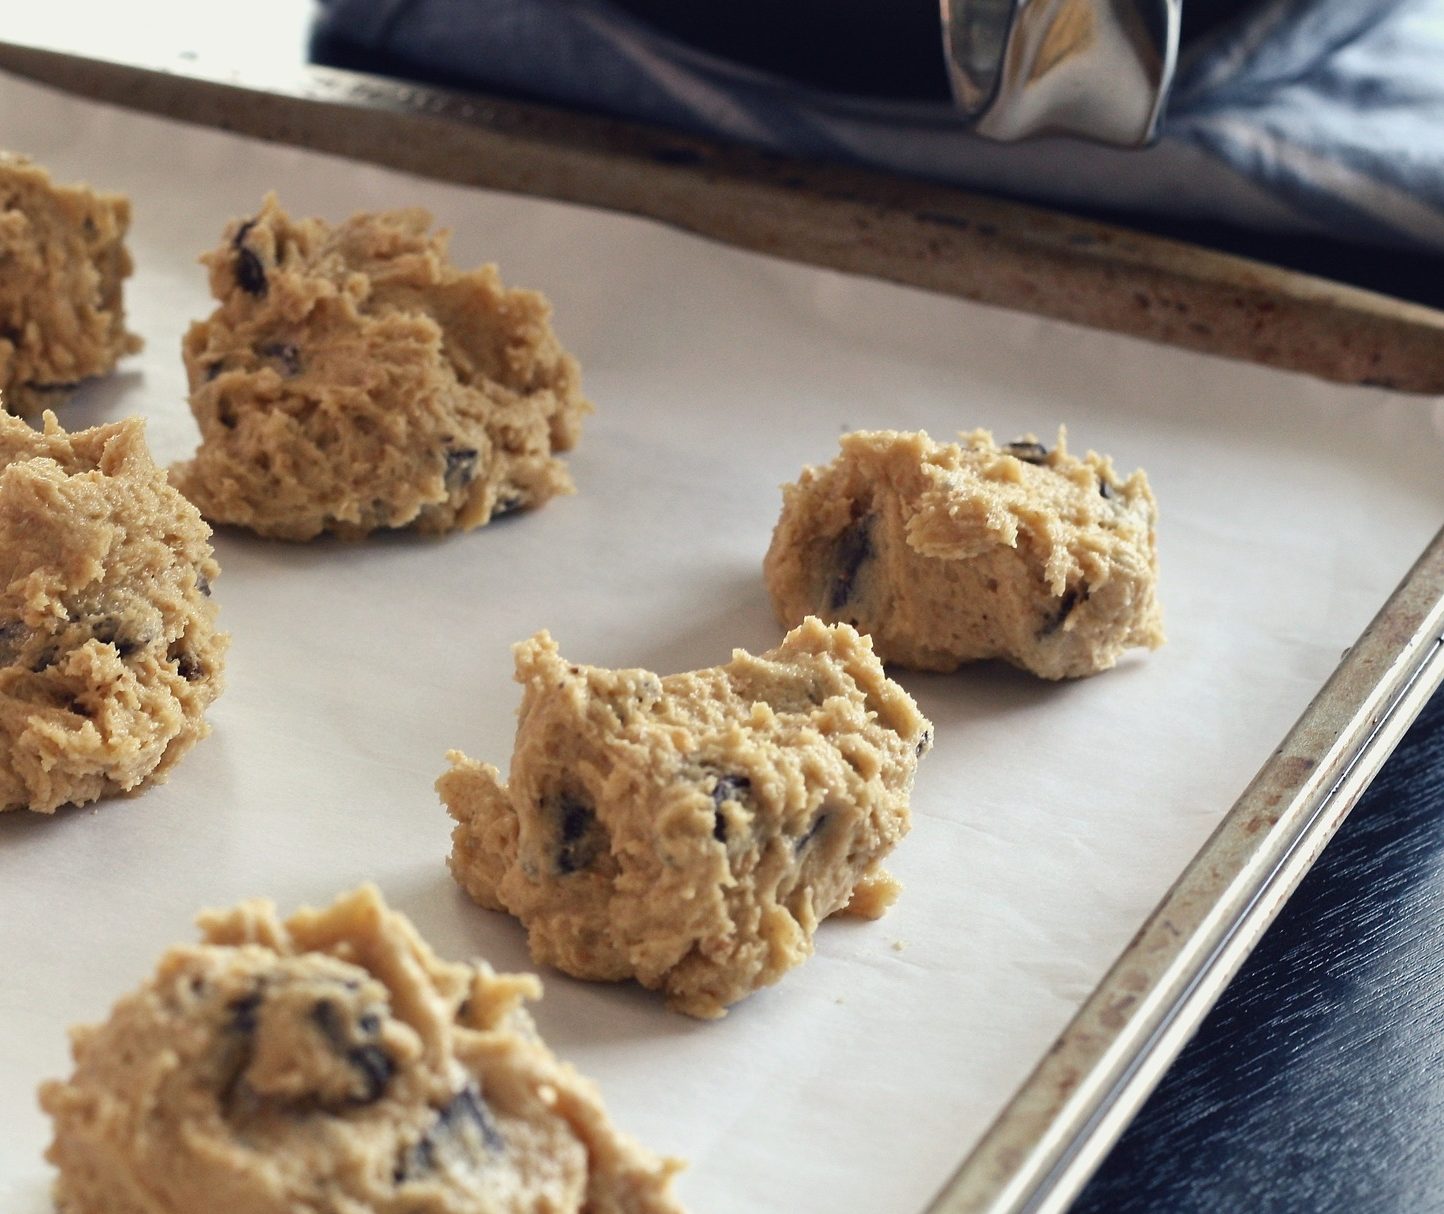 A New Reason To Not Eat Raw Cookie Dough